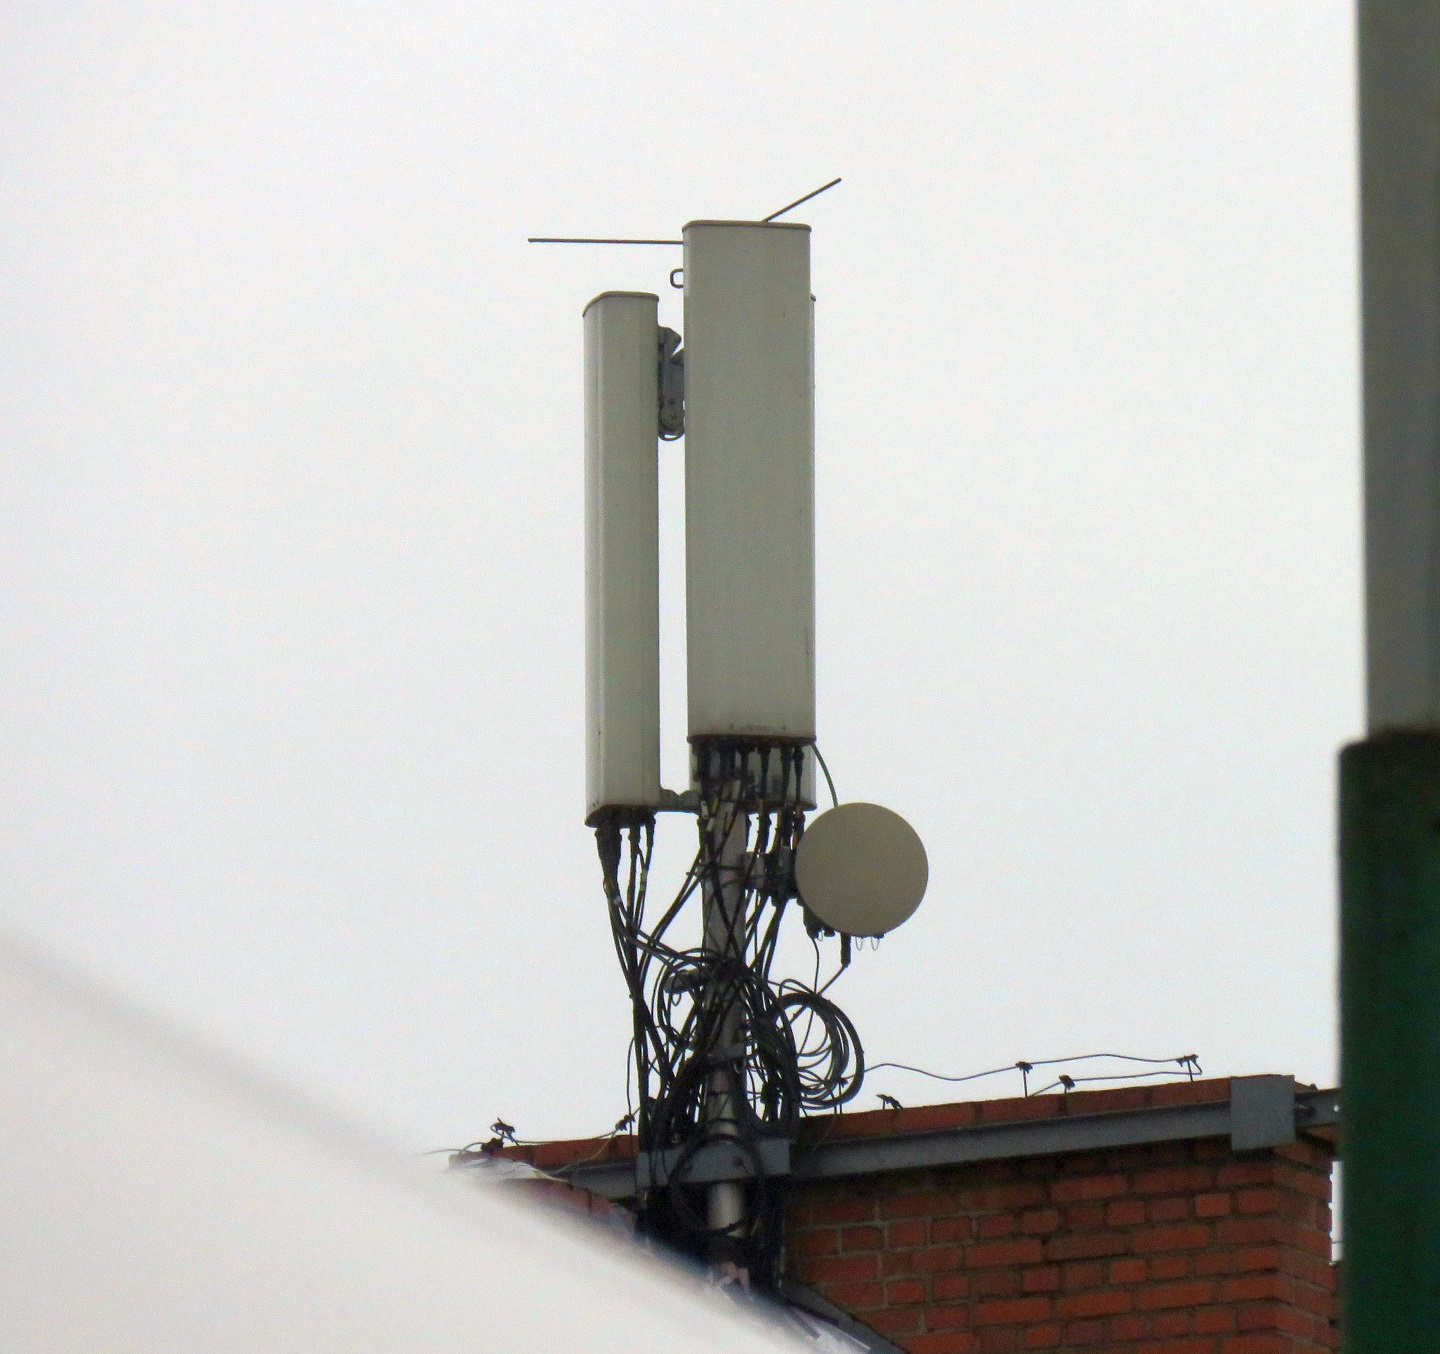 Play's Huawei antennas and RRUs